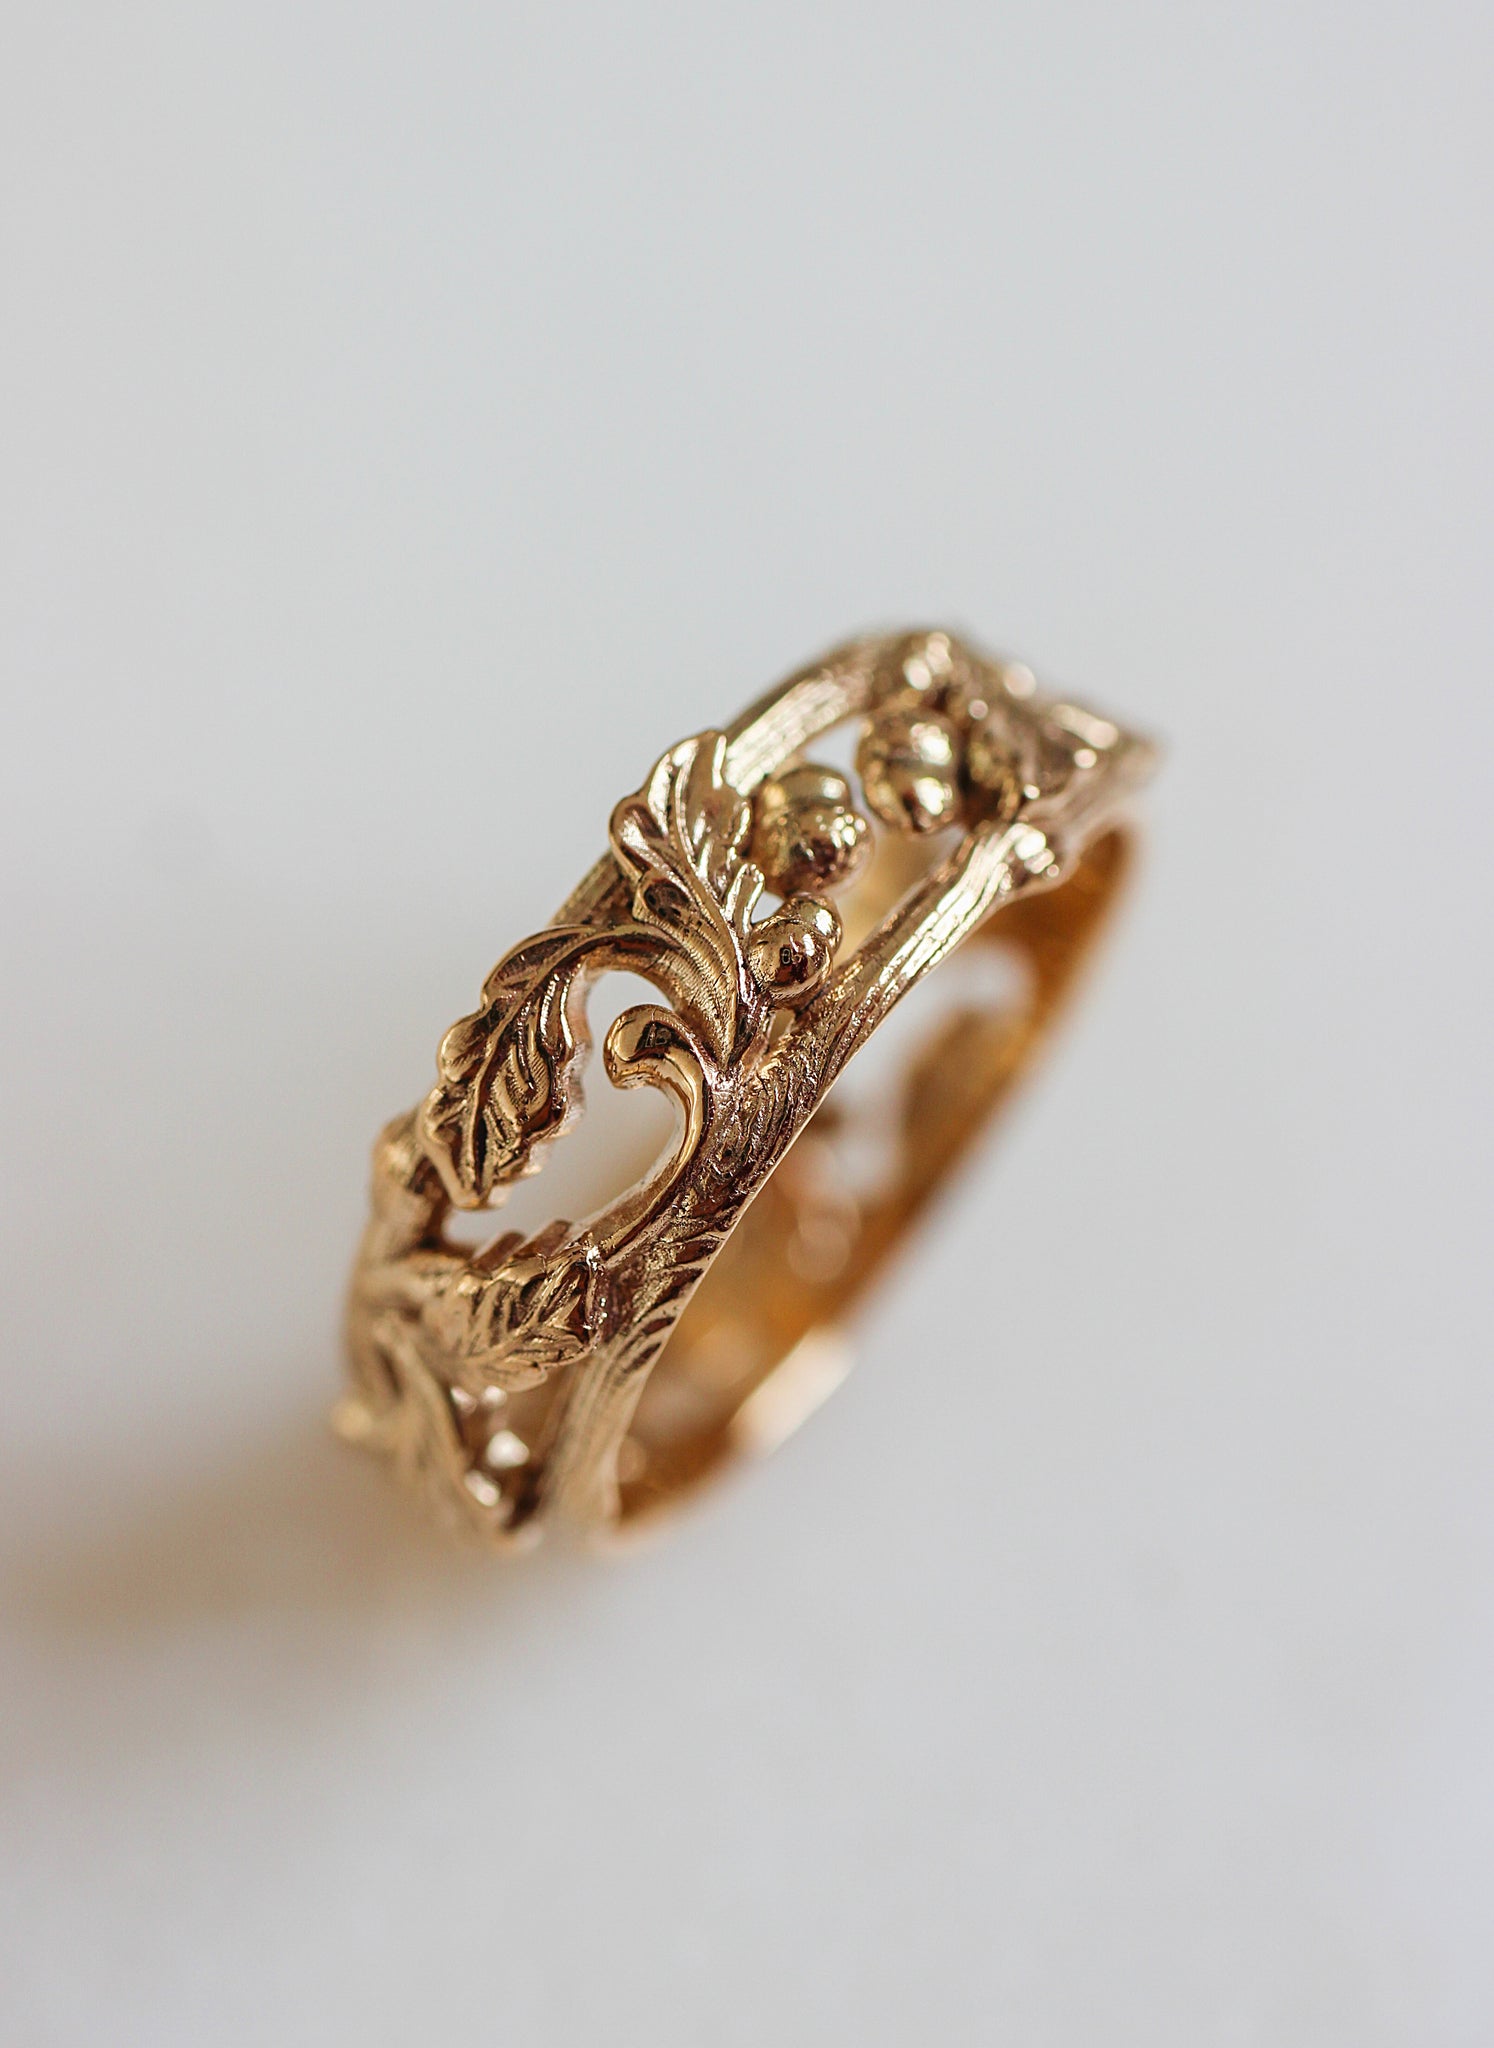 Oak leaves and acorns ring, wedding band for man - Eden Garden Jewelry™